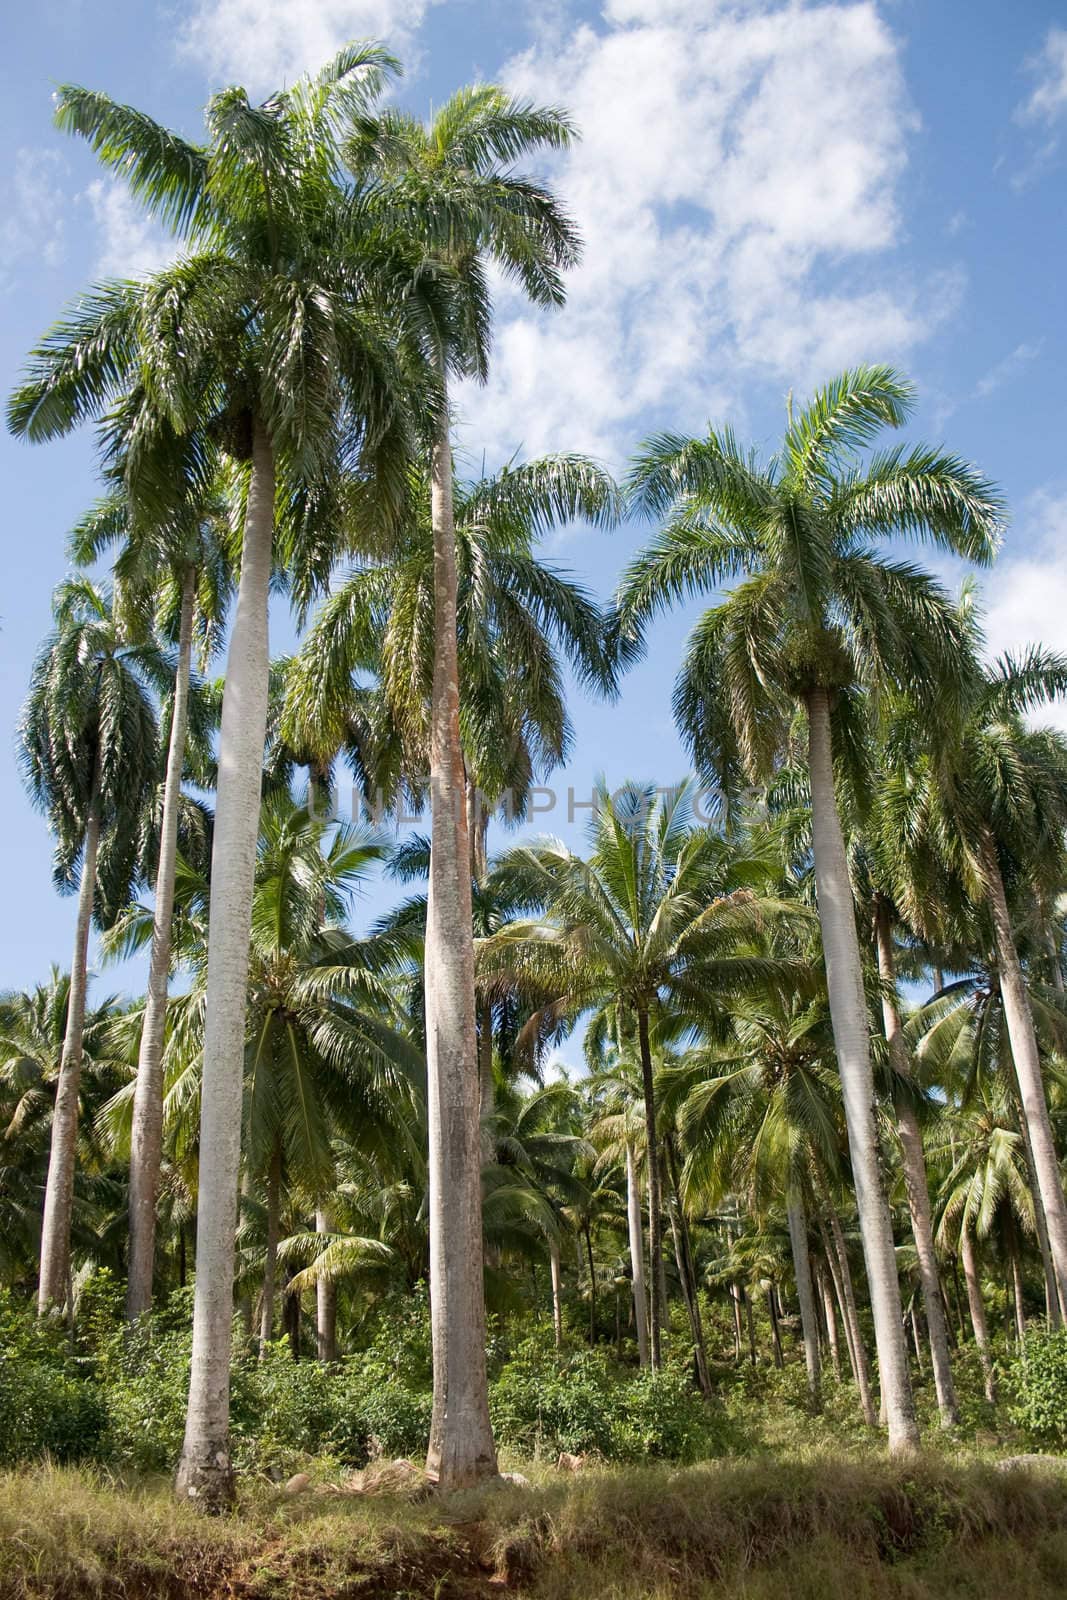 Group of palm trees by Amidos